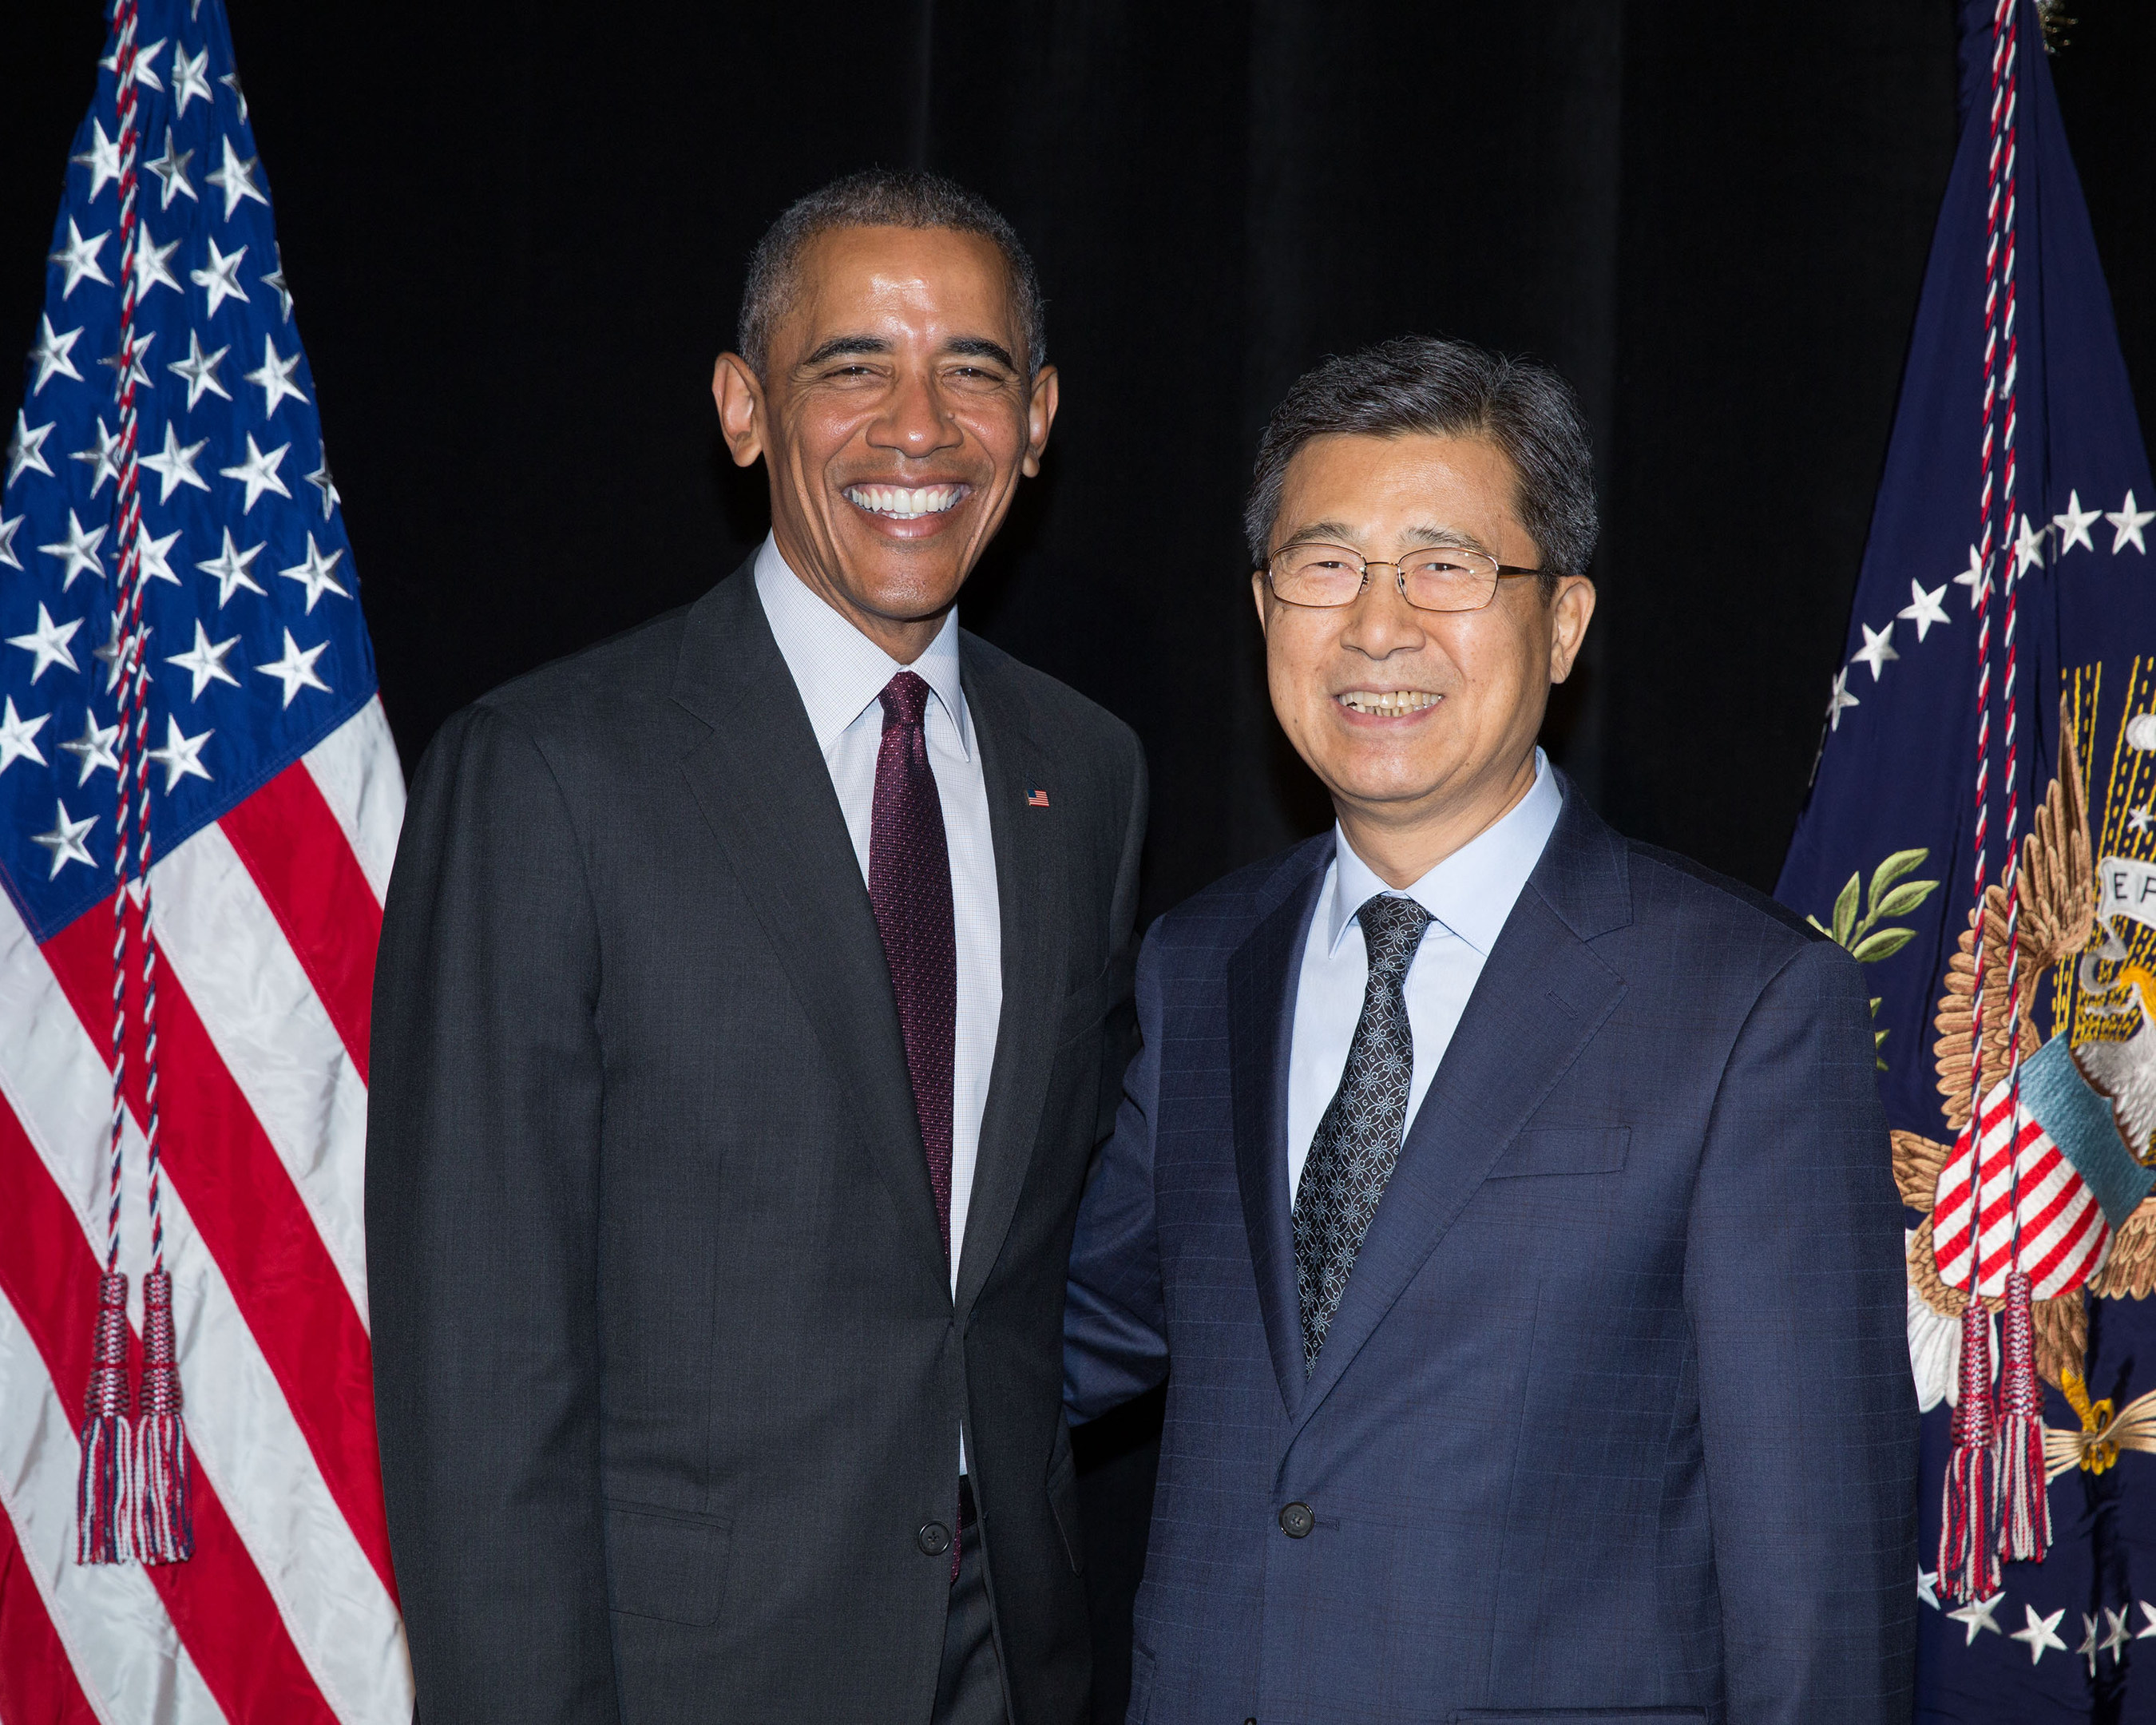 Hankook Tire Vice Chairman and CEO Seung Hwa Suh met with President Barack Obama in an exclusive meet and greet prior to President Obama's keynote speech at DAV's (Disabled American Veterans) 95th National Convention in Atlanta earlier this month, underscoring their shared commitment to supporting America's veterans. Hankook has been a proud partner of DAV's since 2014 and continues to work with DAV to provide veterans with the benefits and services they need following their military service.